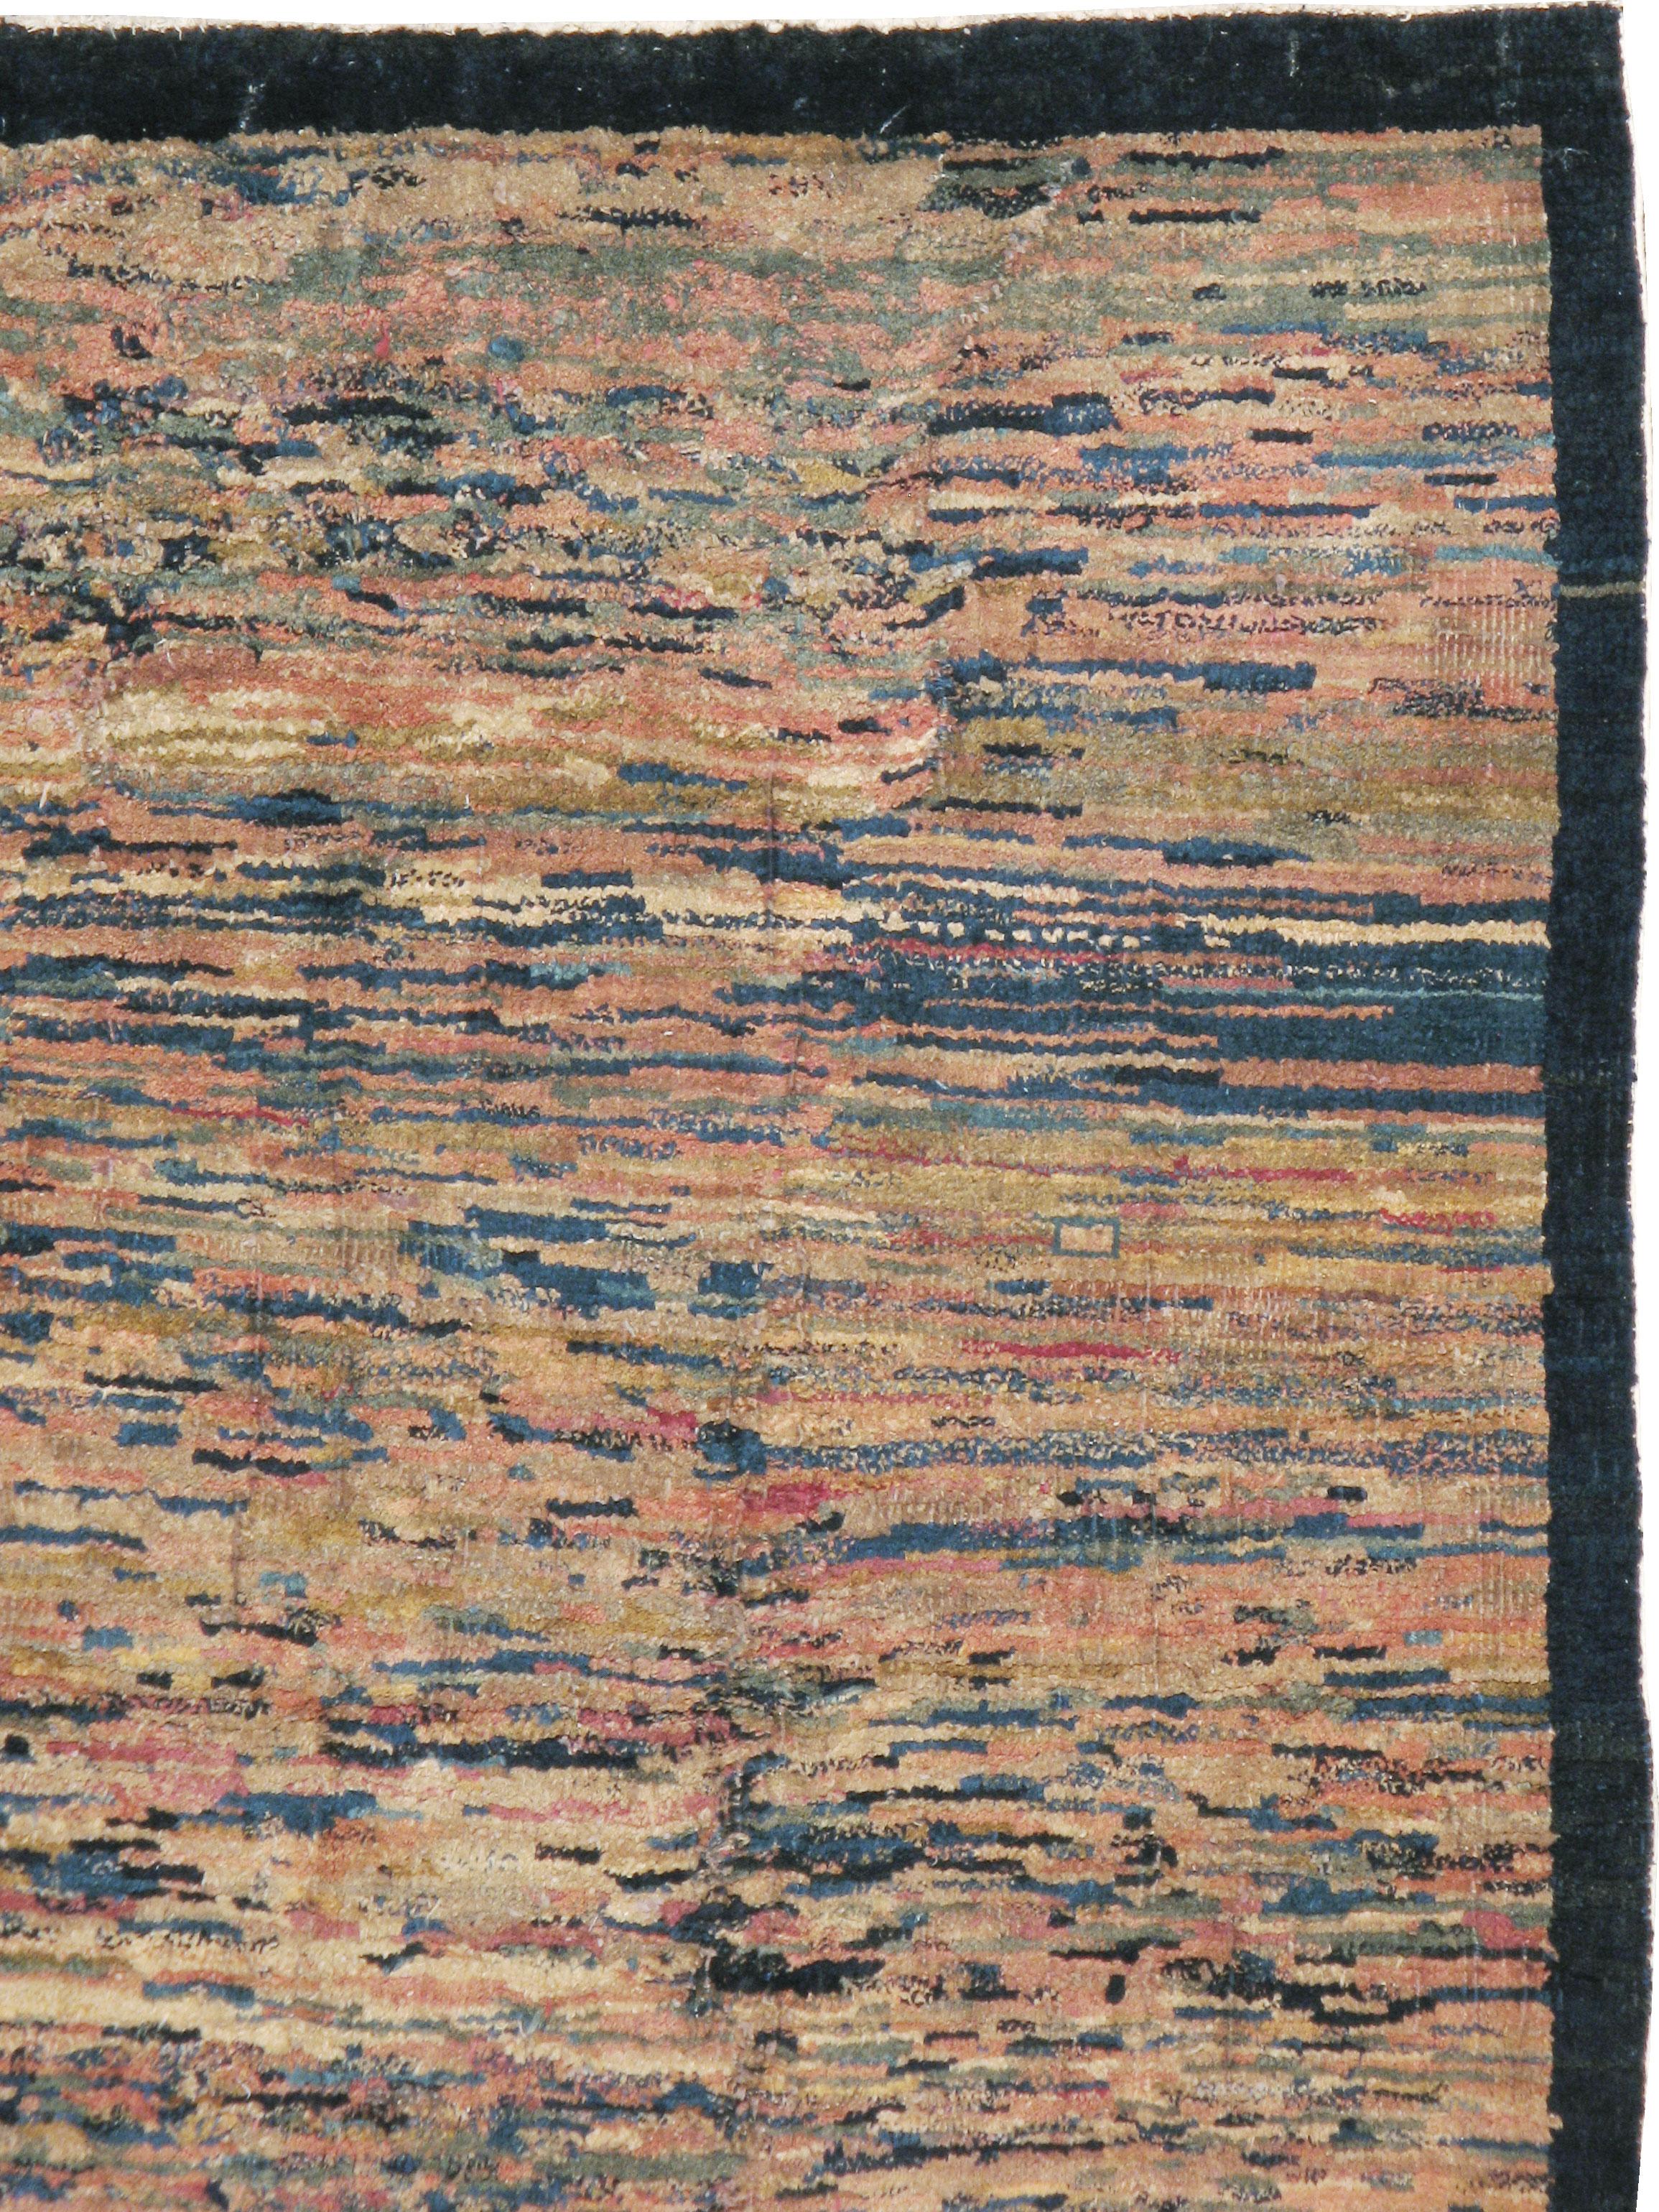 An antique Chinese Art Deco rug from the early 20th century. An ‘end of the day’ rug knotted from all sorts of yarn bits from the workshop left over from larger, patterned pieces. The unique, idiosyncratic nature of these interwar rugs makes them